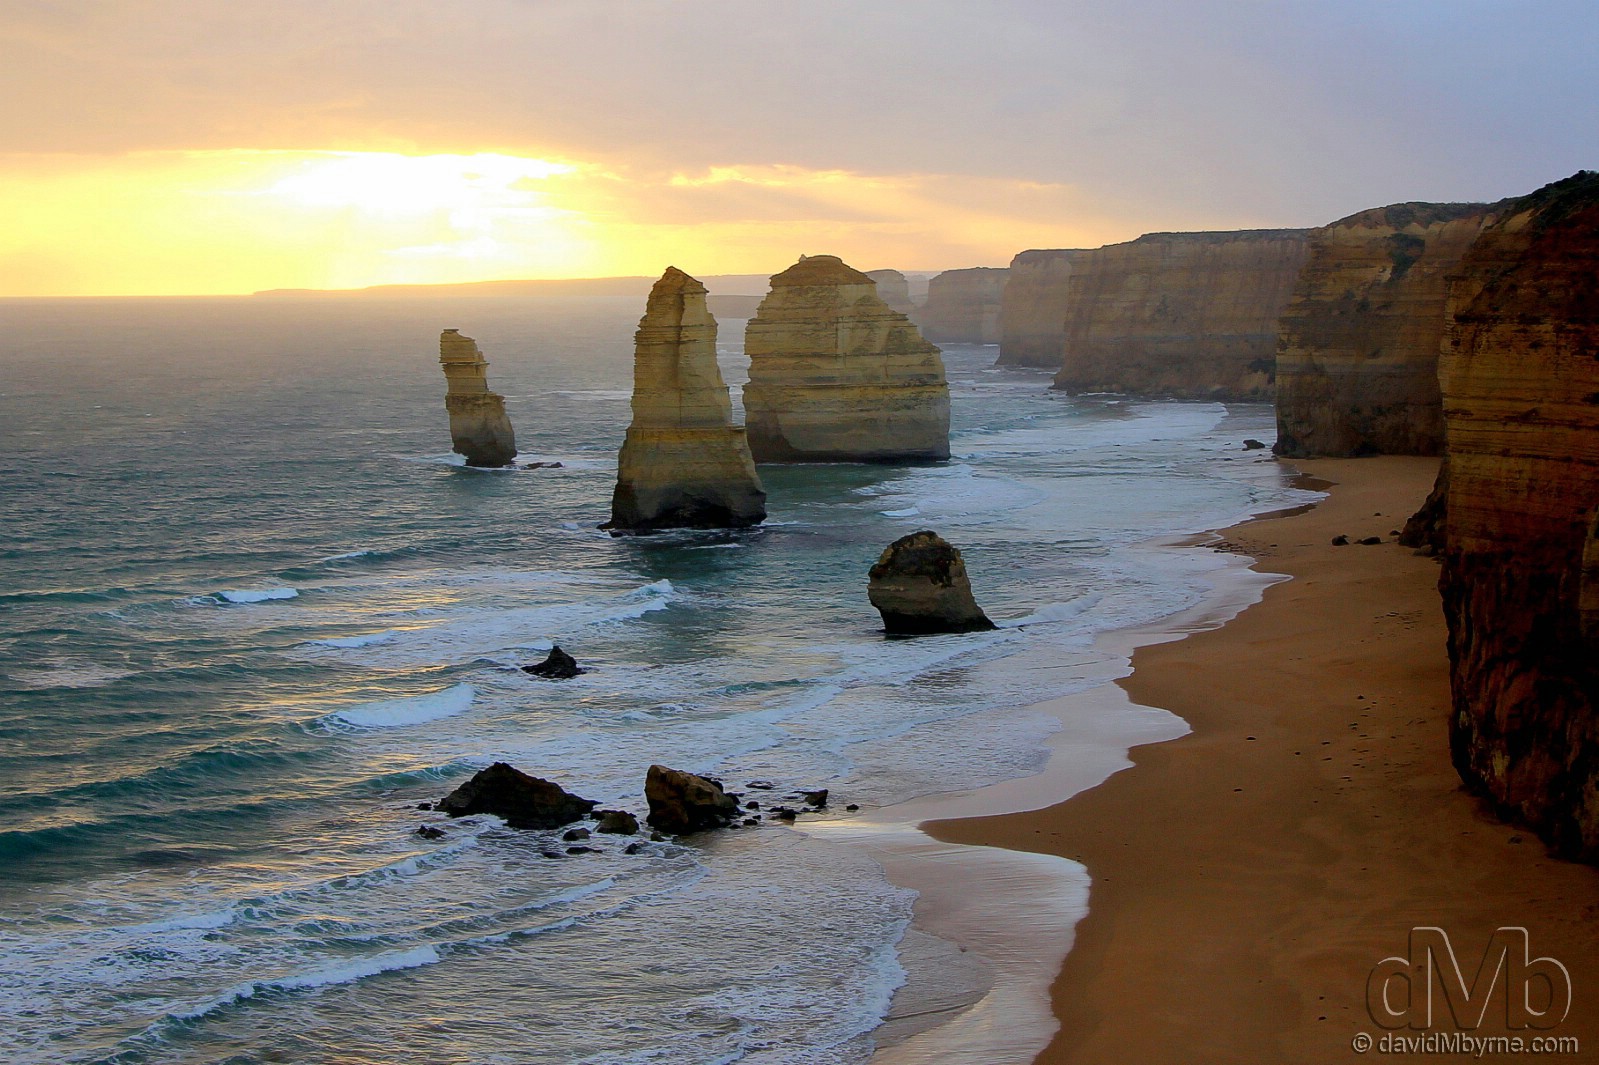 Sunset at The Twelve Apostles of the The Great Ocean Road, Victoria, Australia. April 22nd, 2012 (EOS 60D || Tamron 28-75mm | 28mm, 1/125sec, f/5.0, iso100)